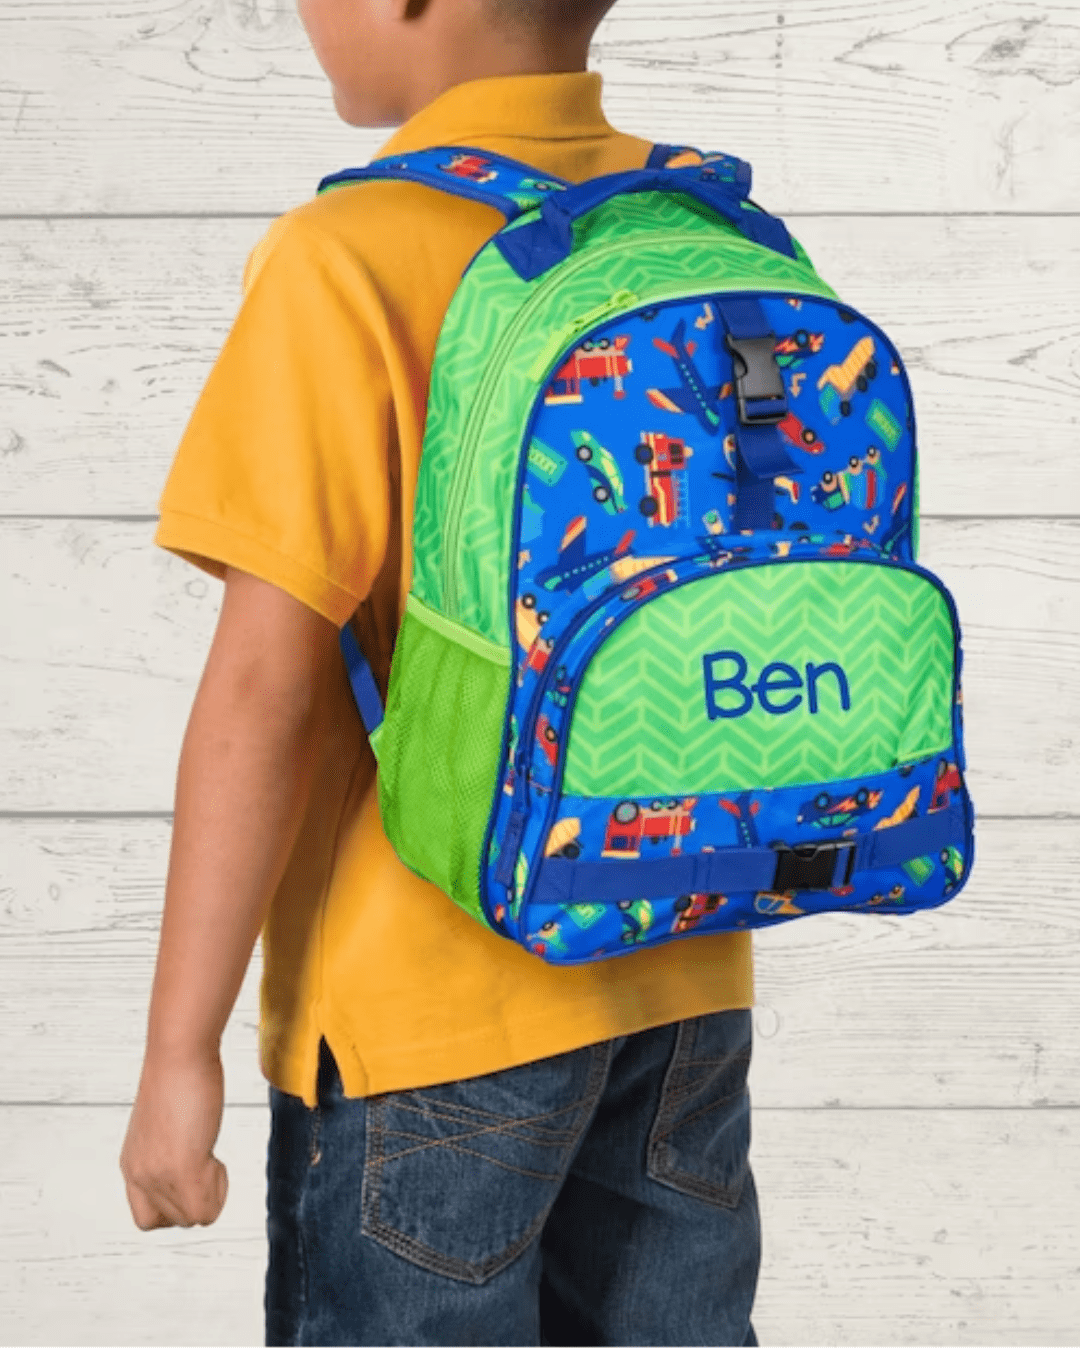 ring bearer proposal gifts printed backpack